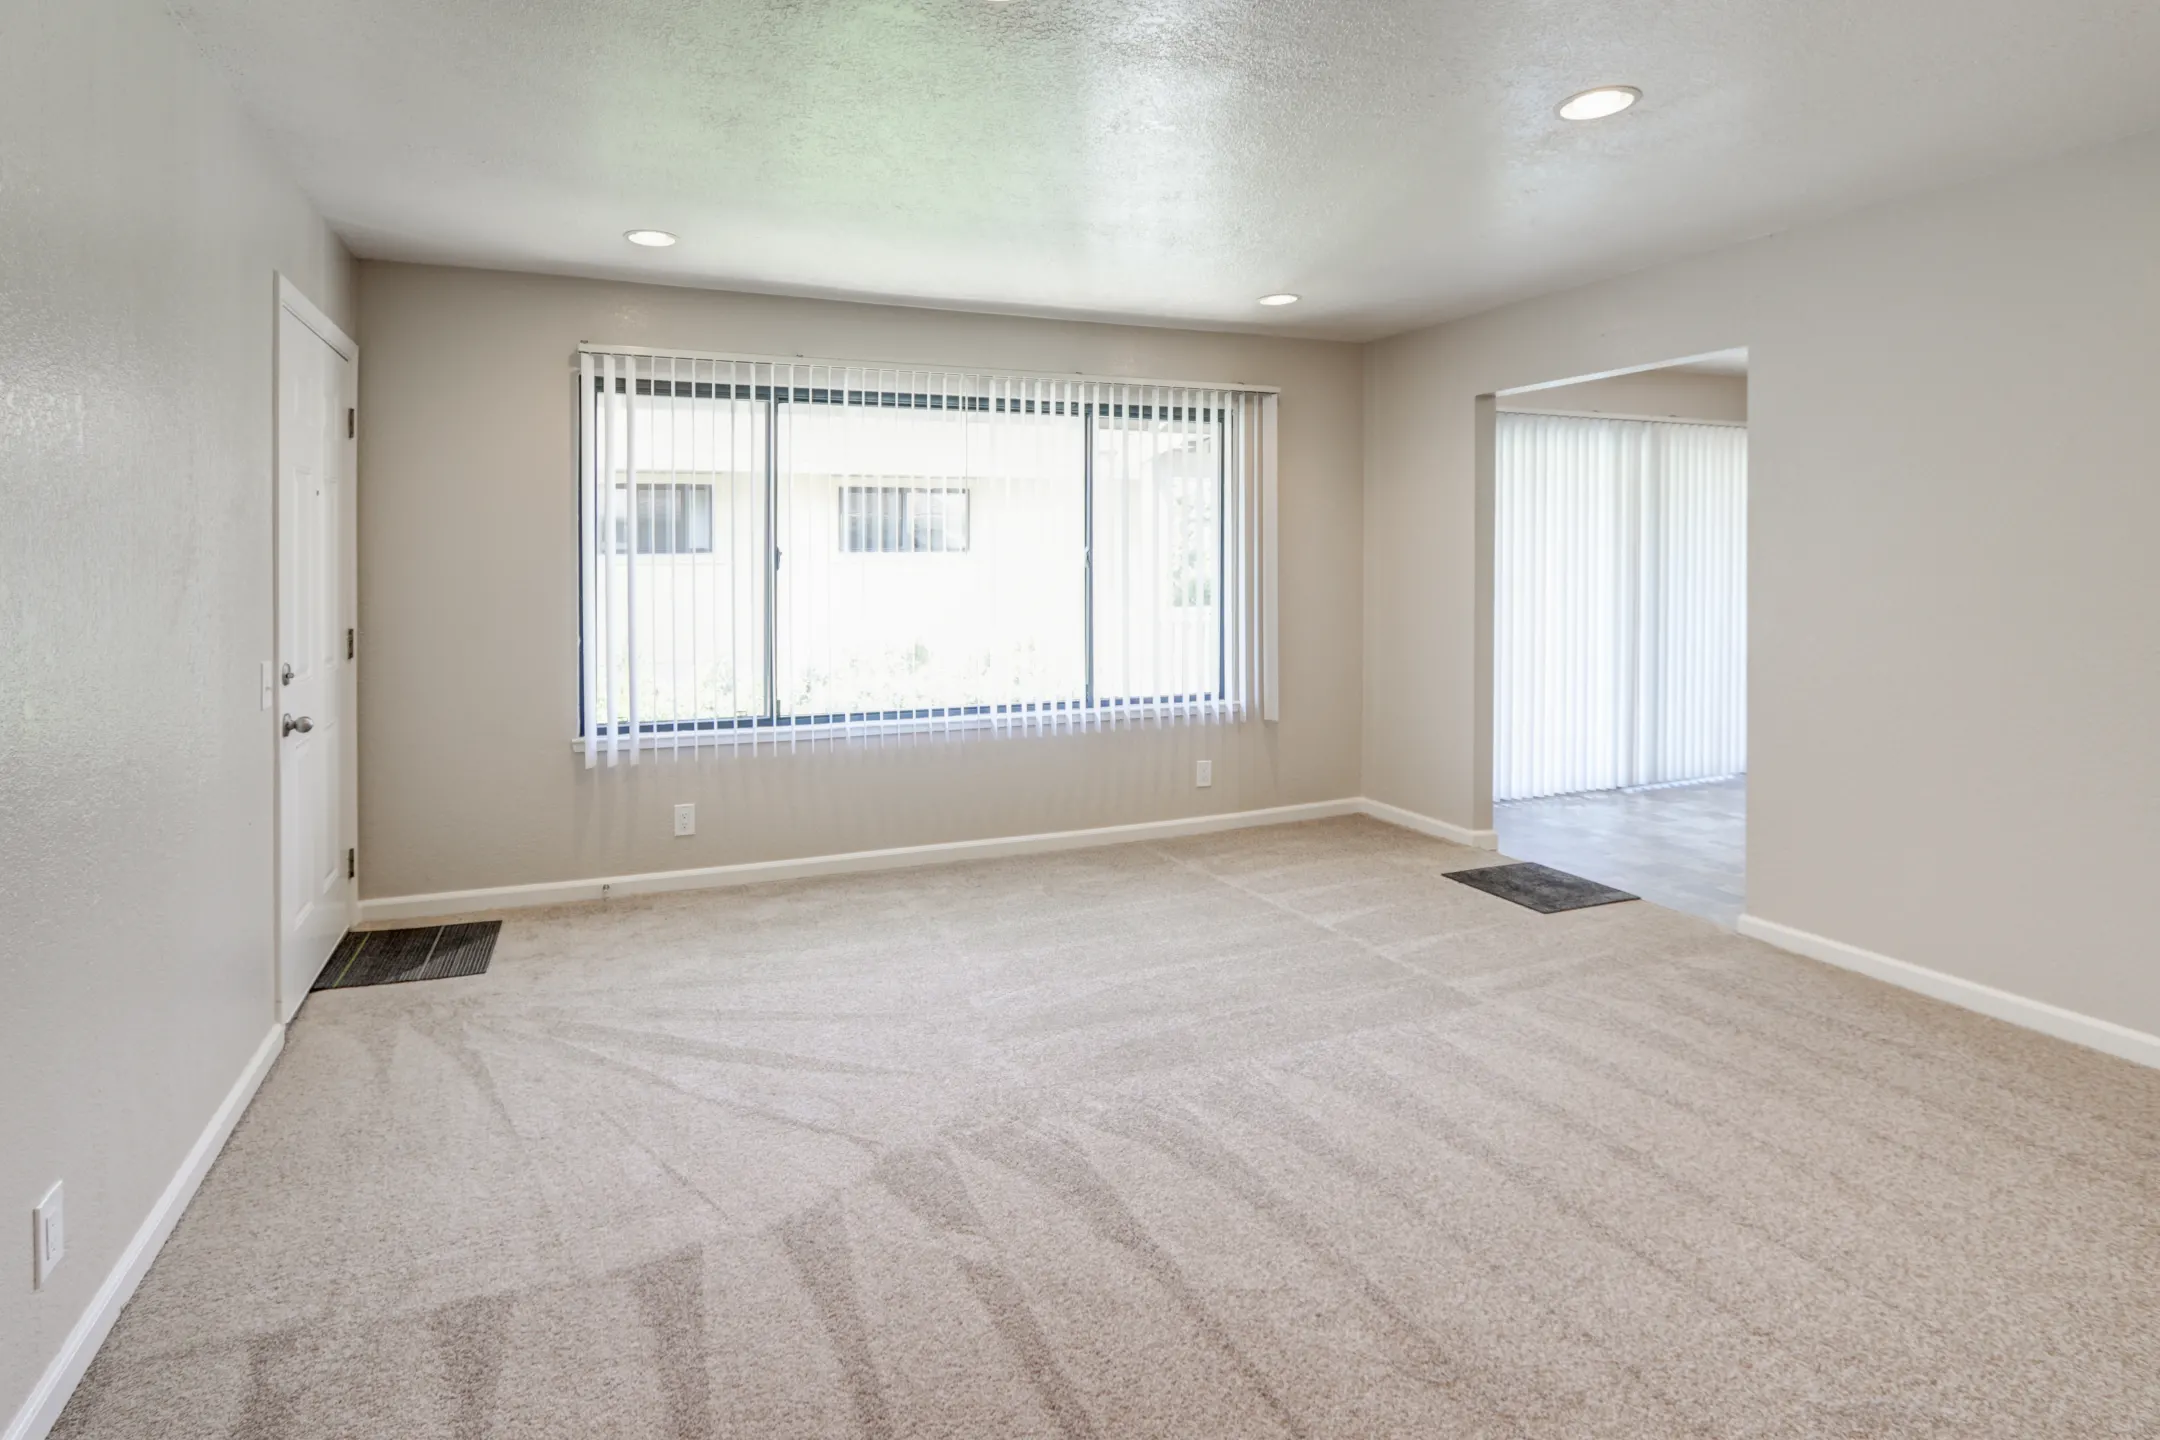 Living Room - CityPlace Apartments - Concord, CA